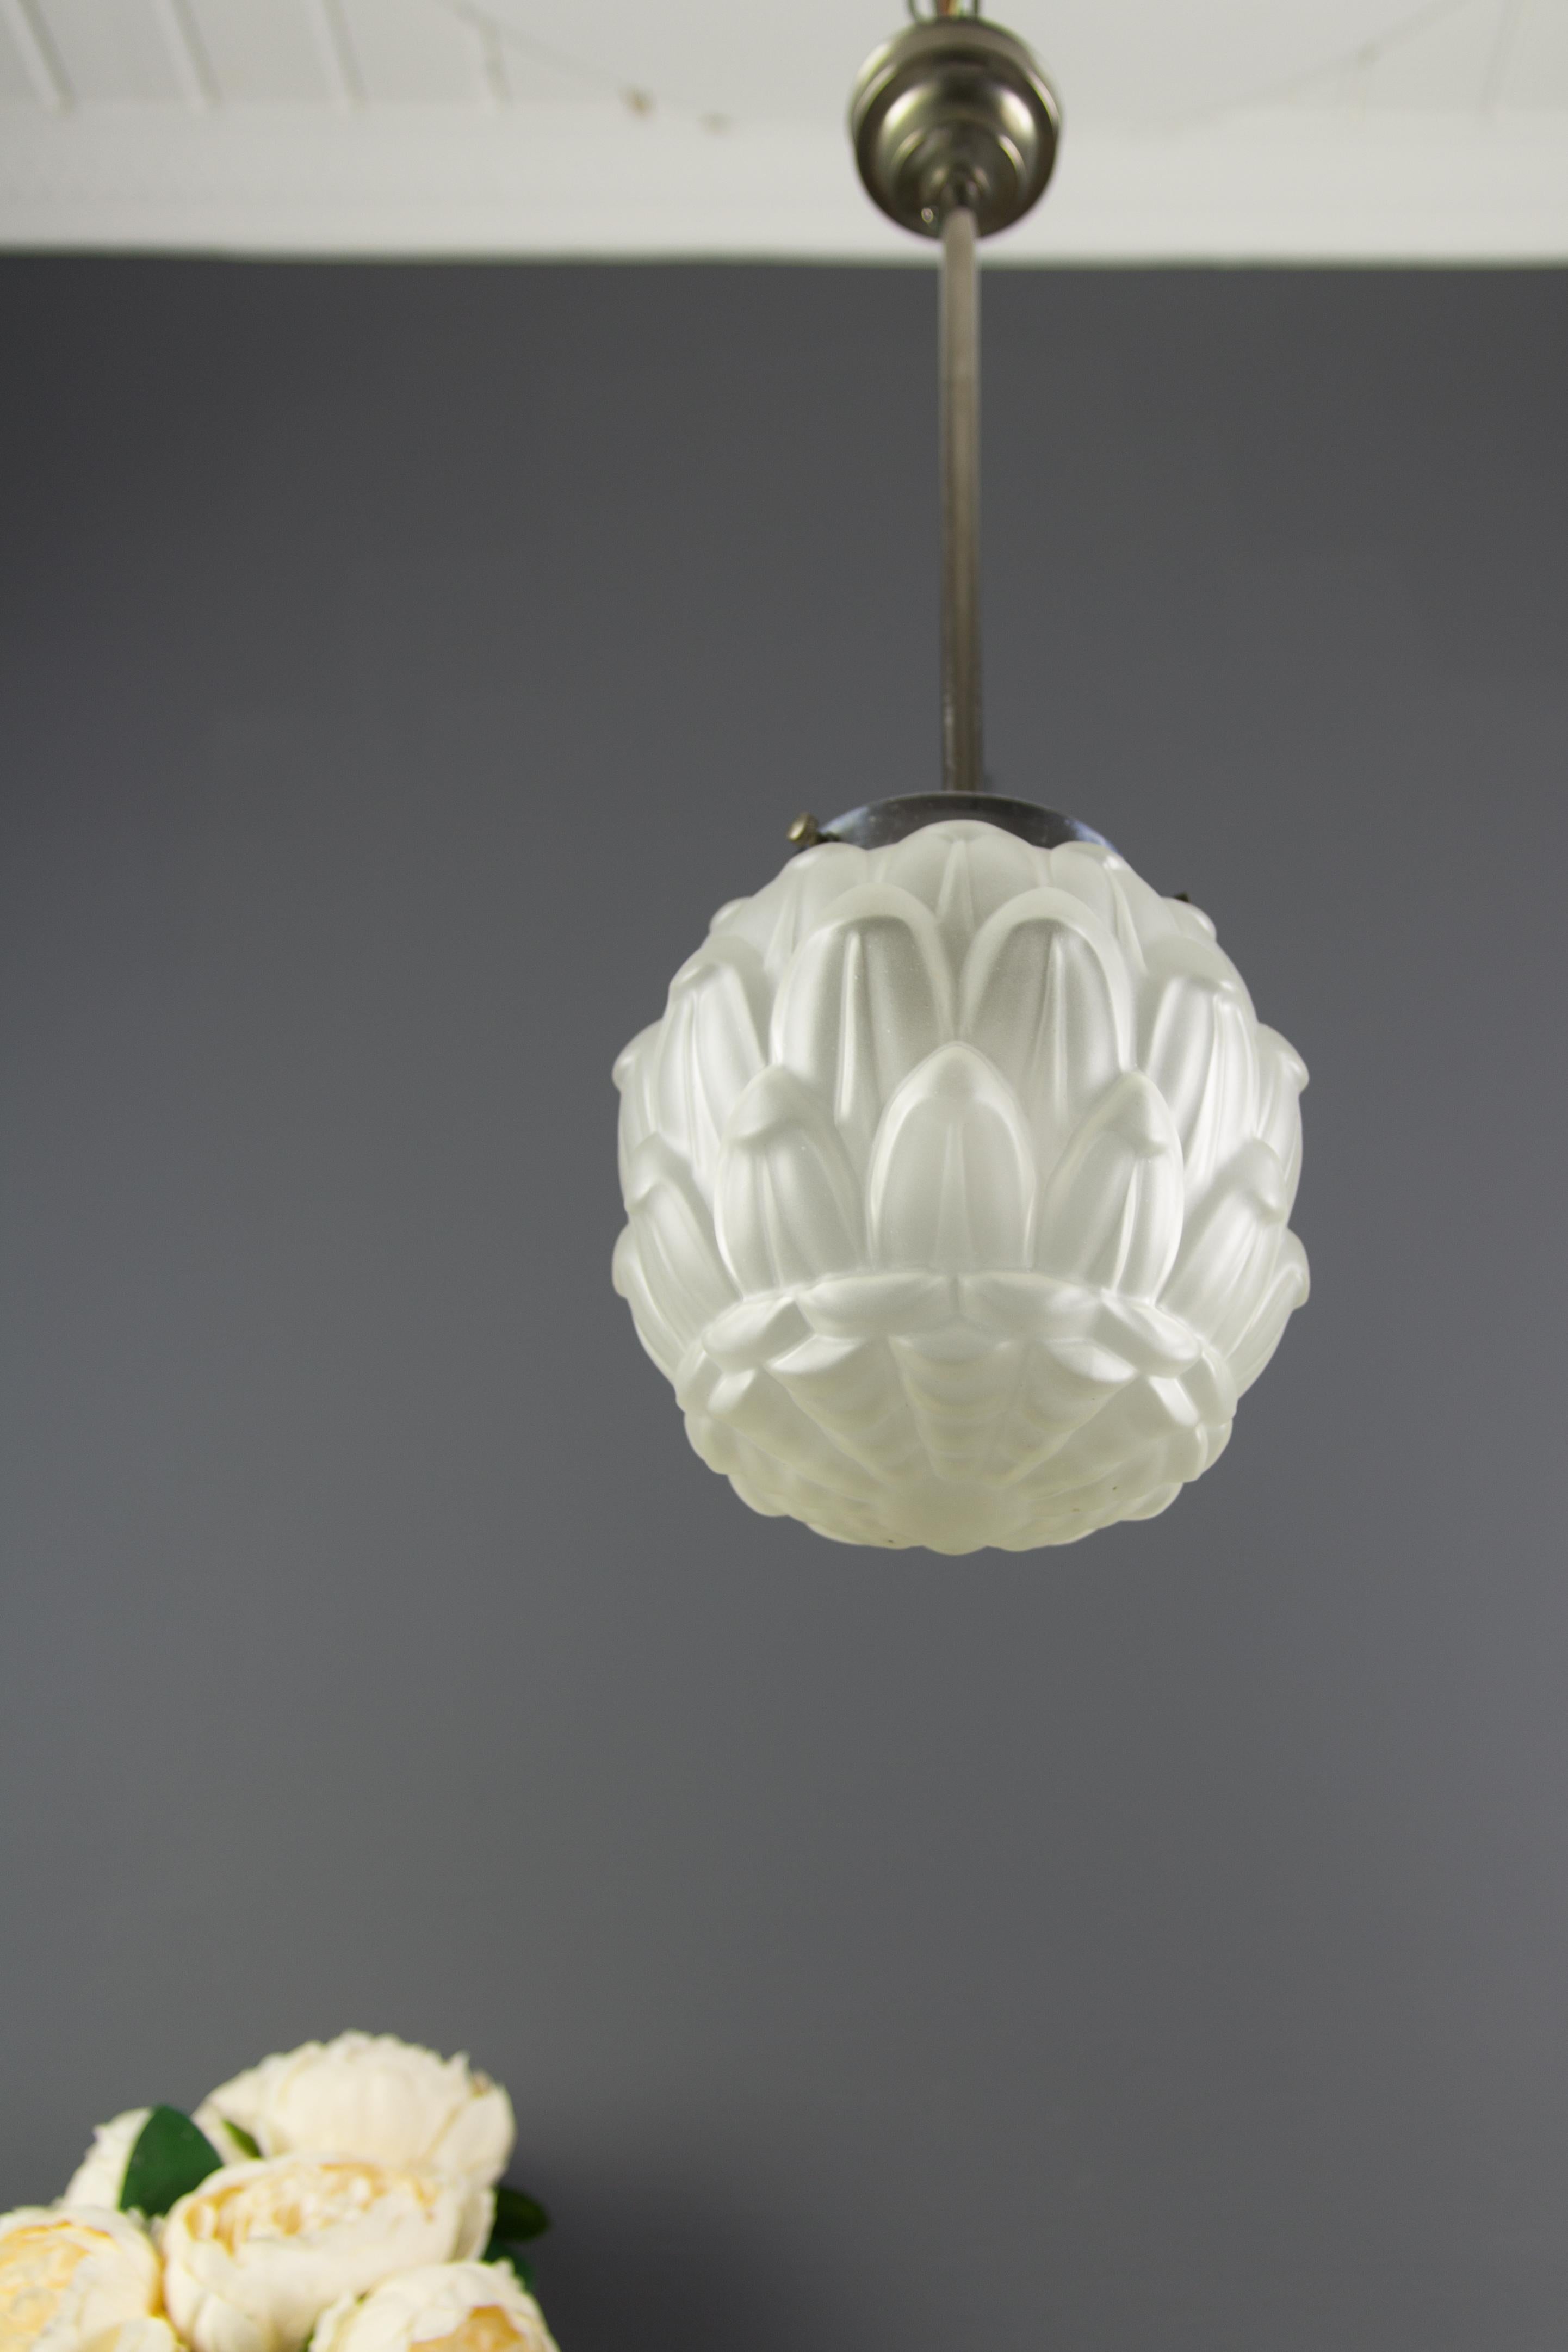 French Art Deco White Frosted Glass and Chrome Pendant Ceiling Light, 1930s